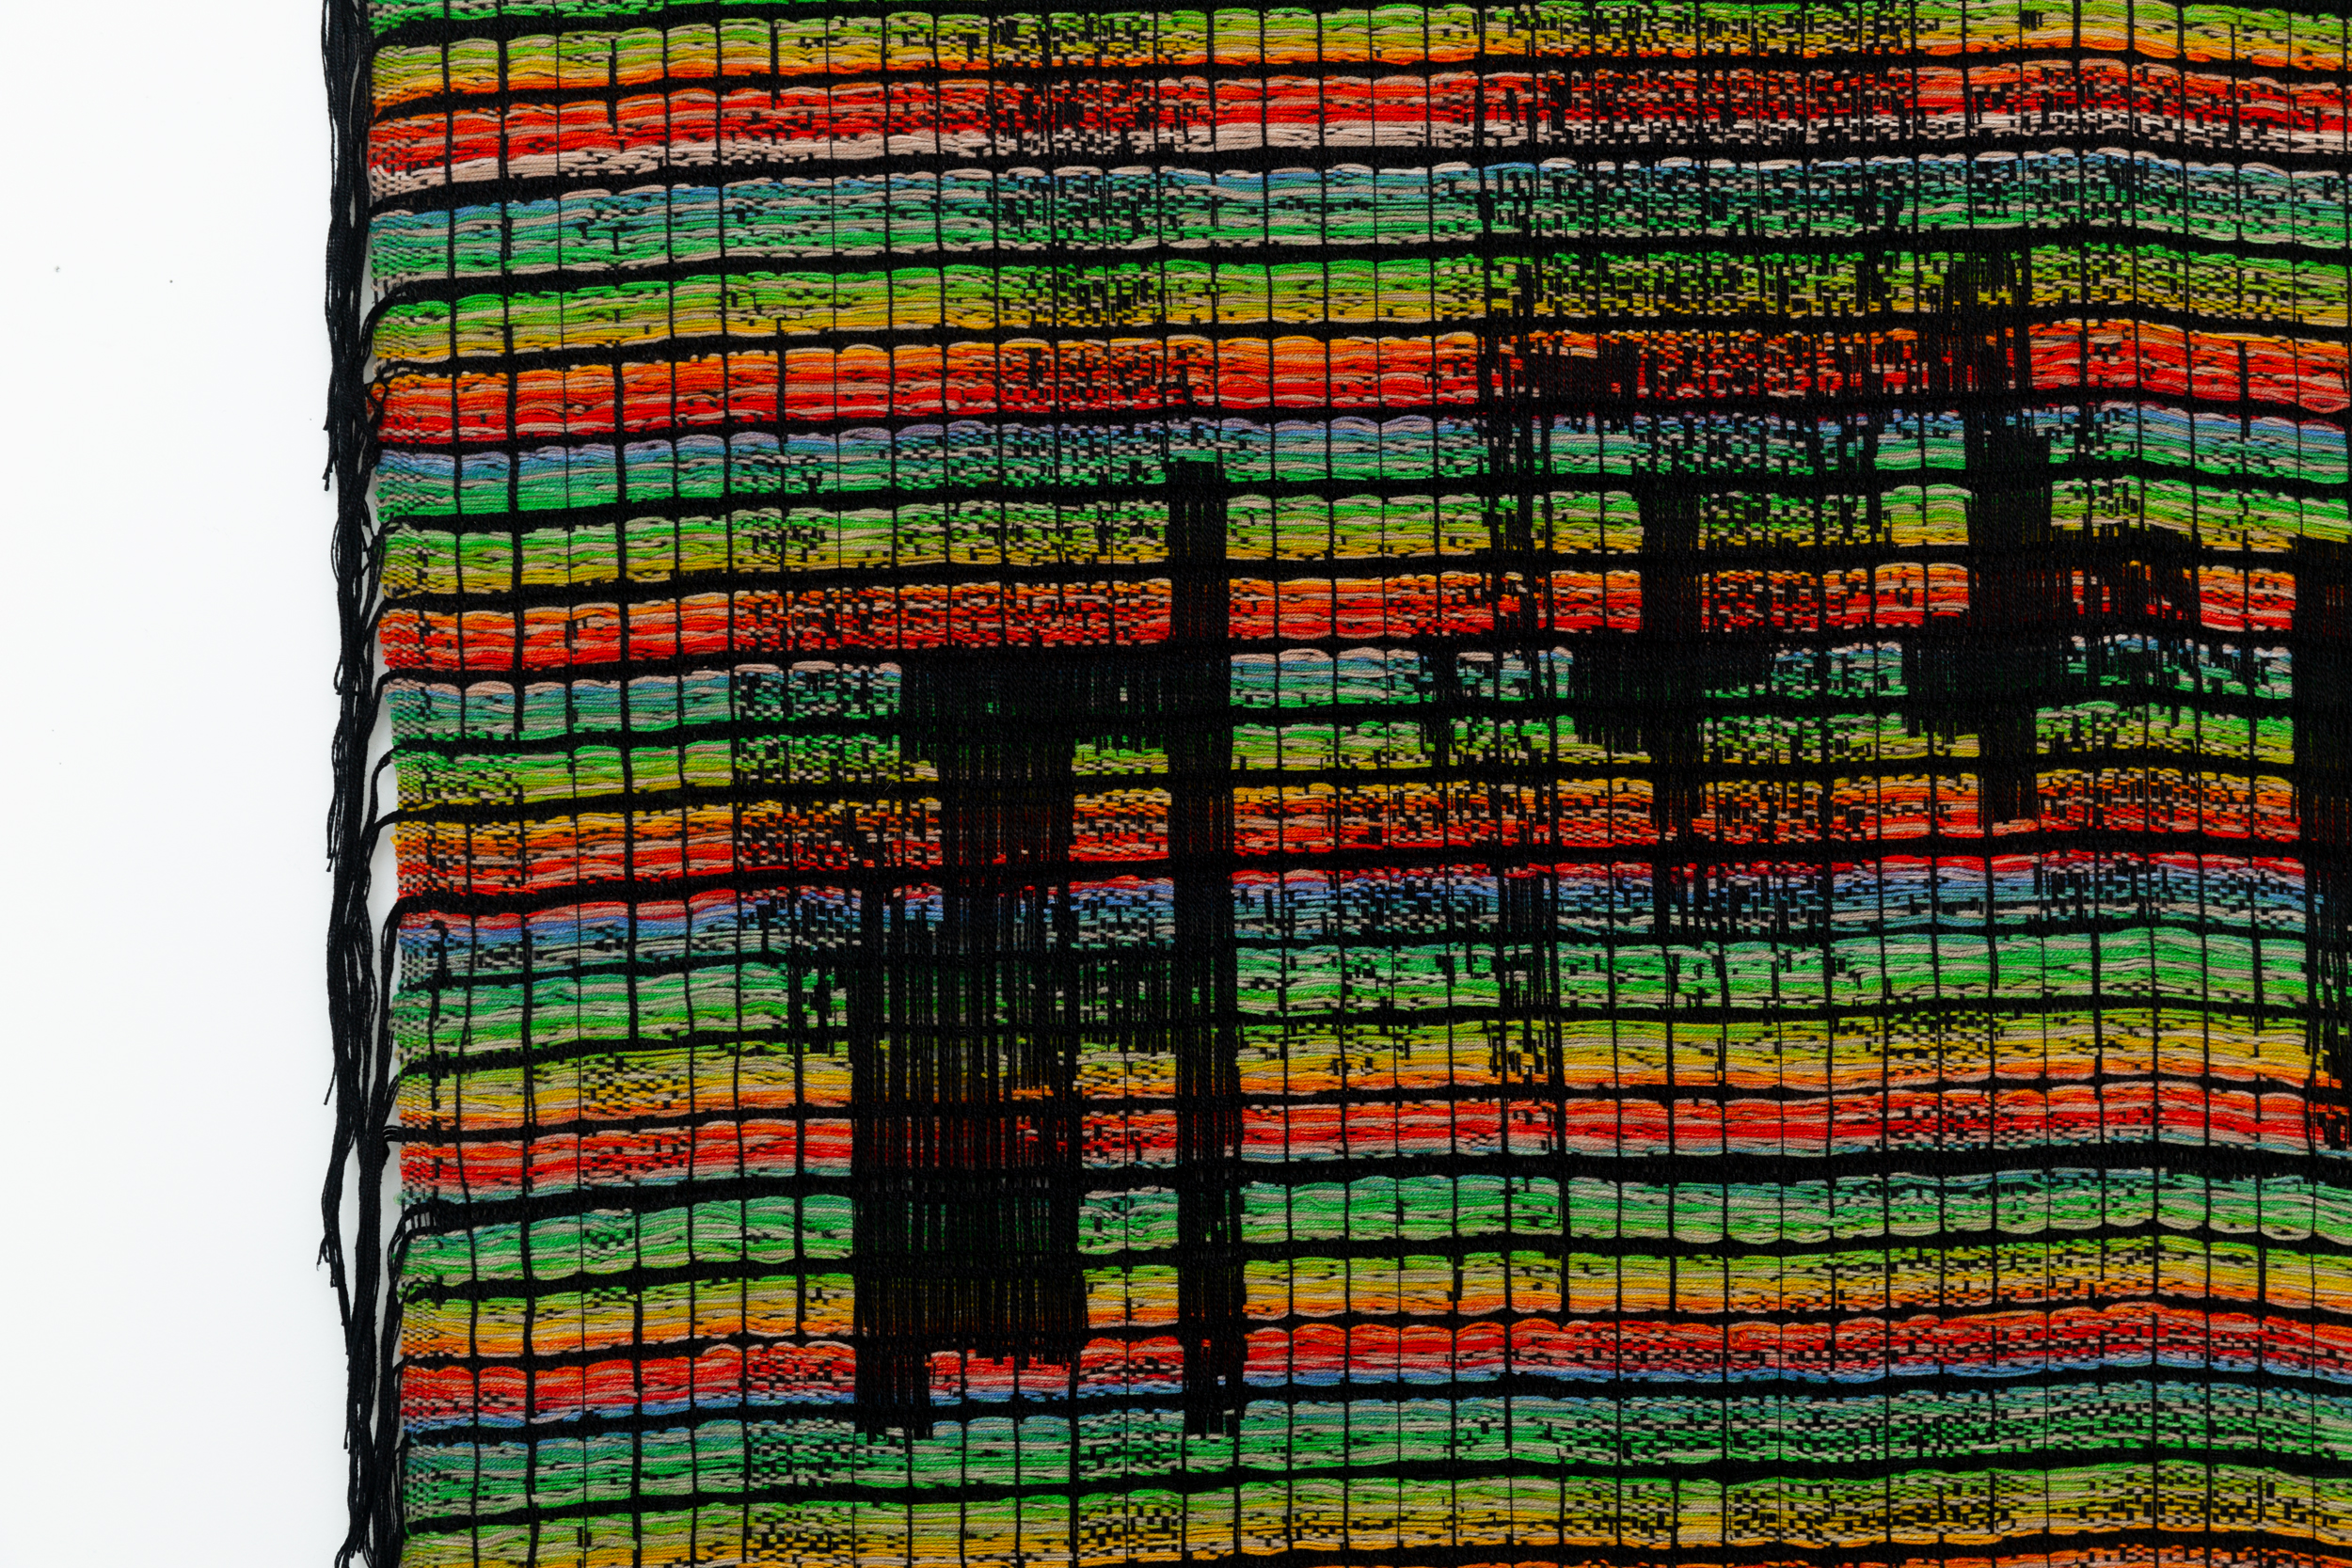 Detail of a colorful woven textile.